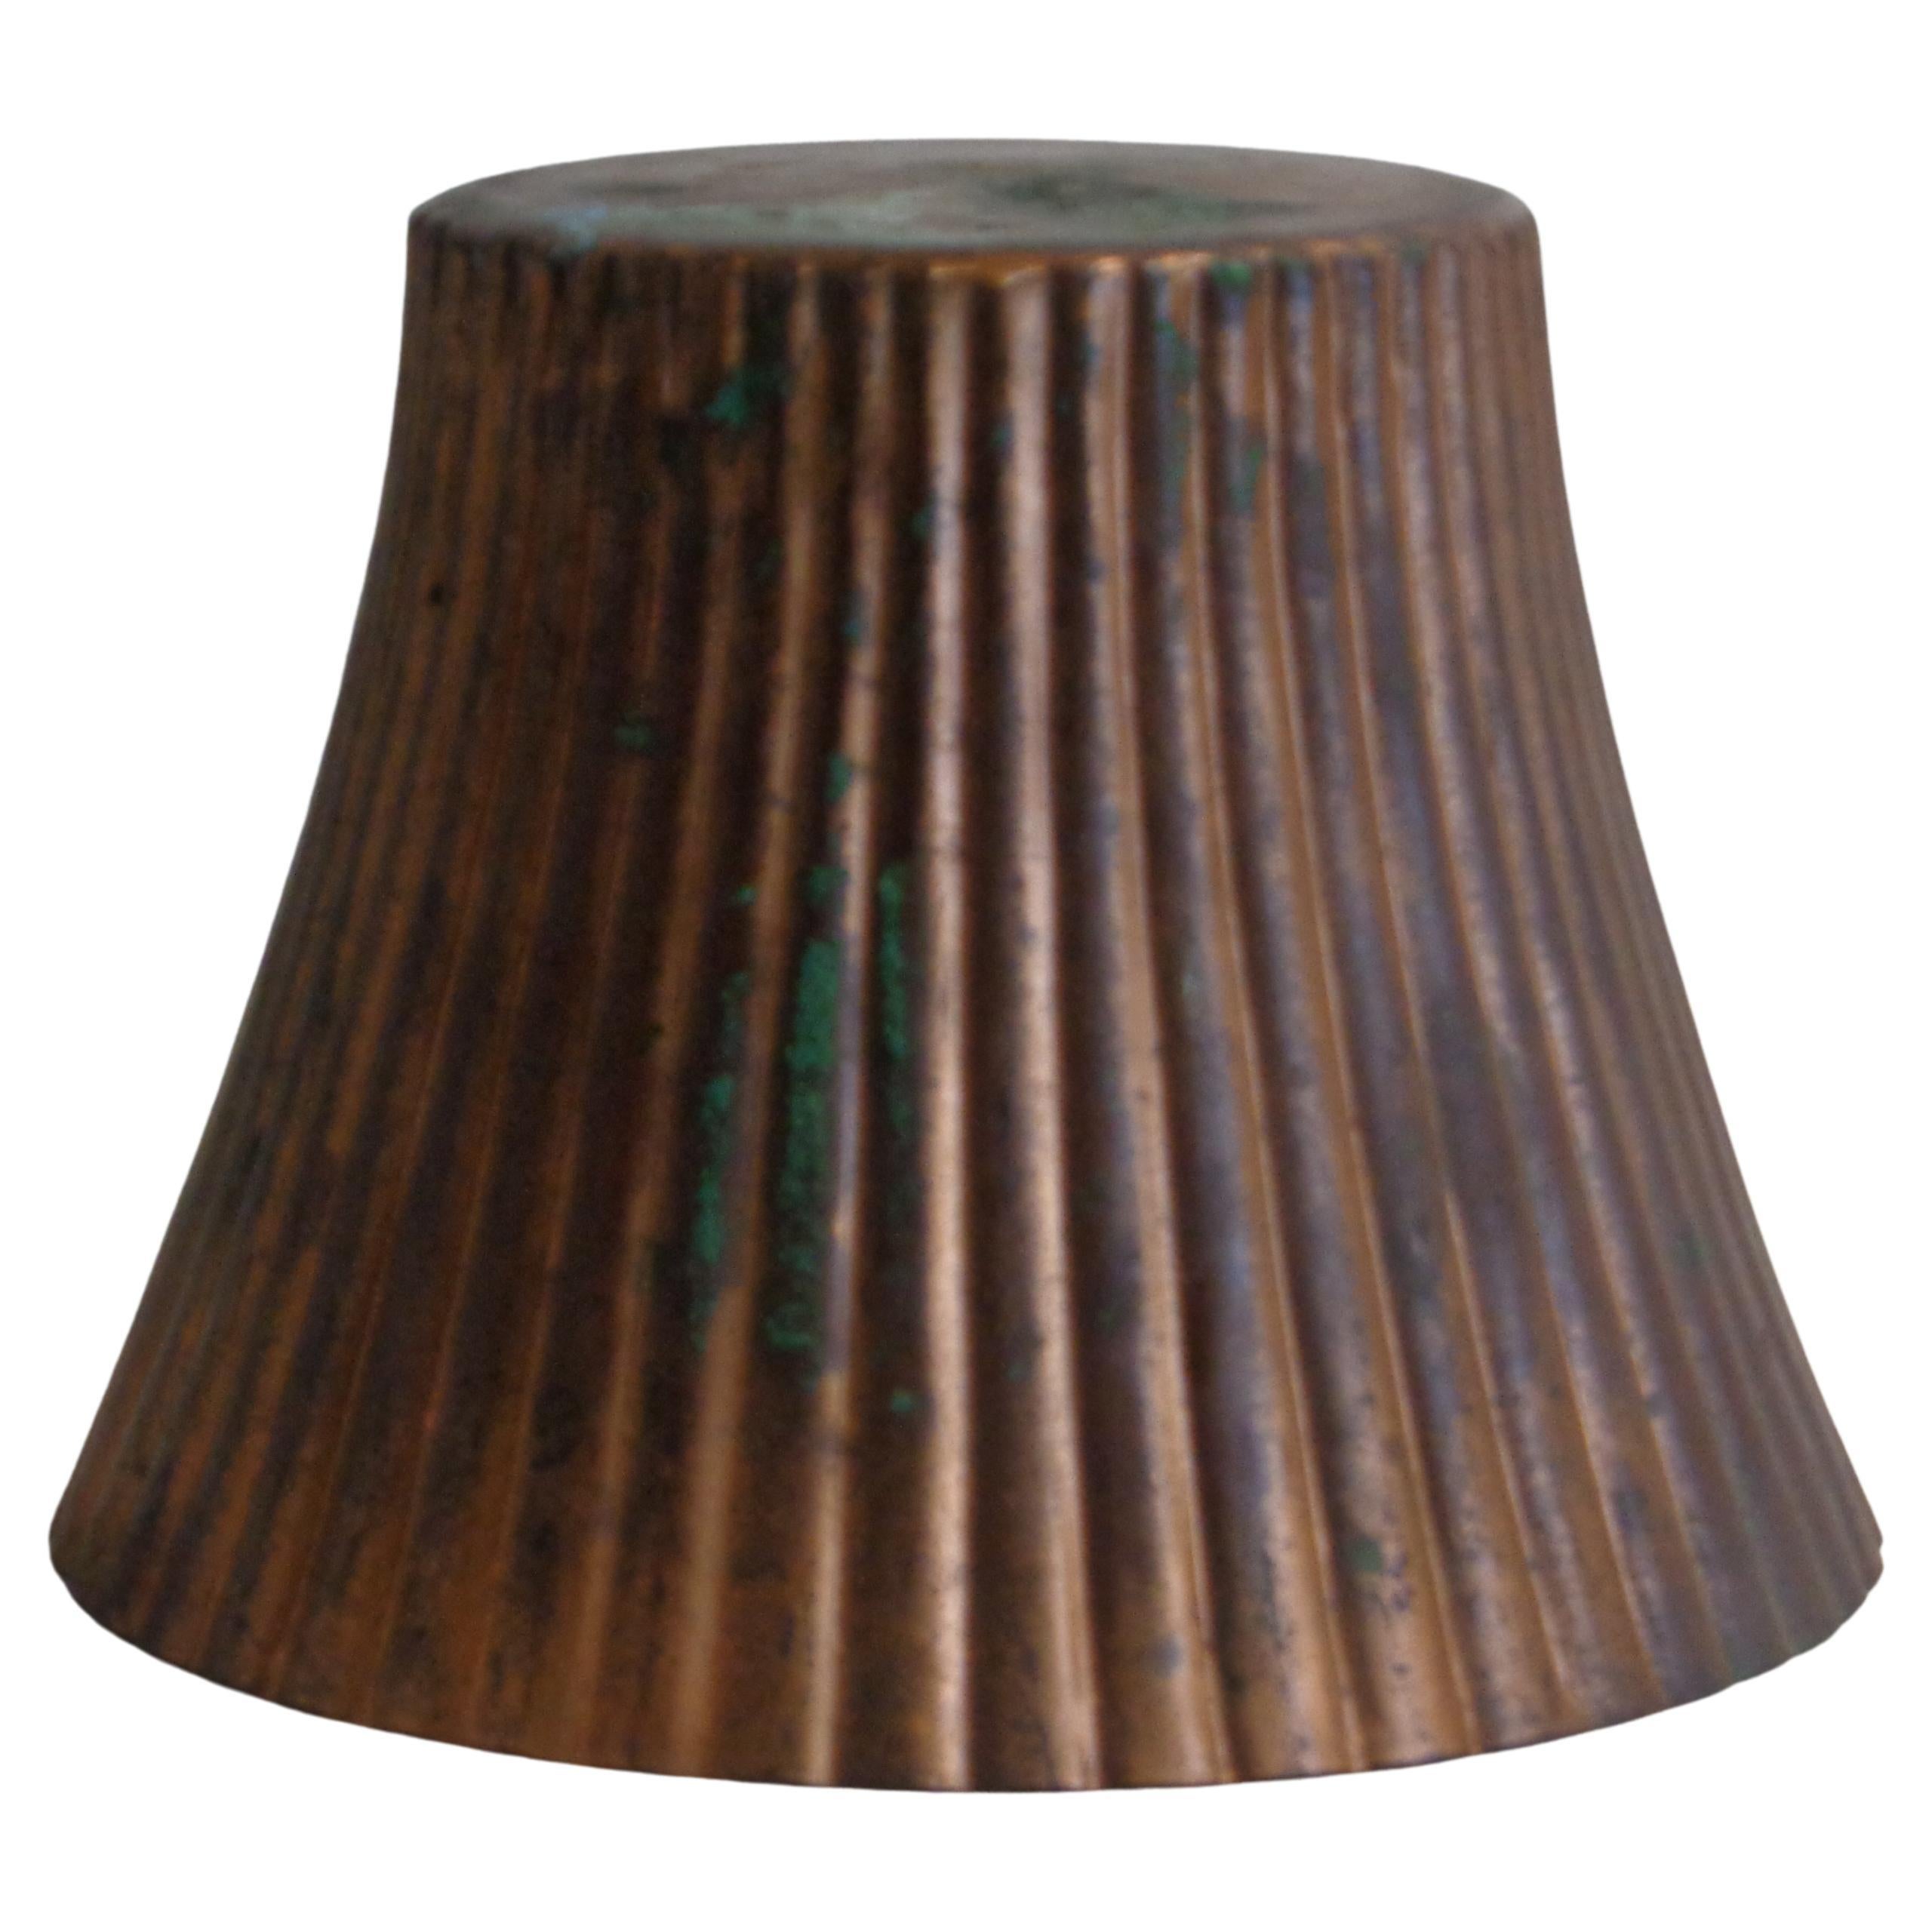 Mid-20th Century Fluted Copper Vase - Chase Brass and Copper Company, 1930's For Sale